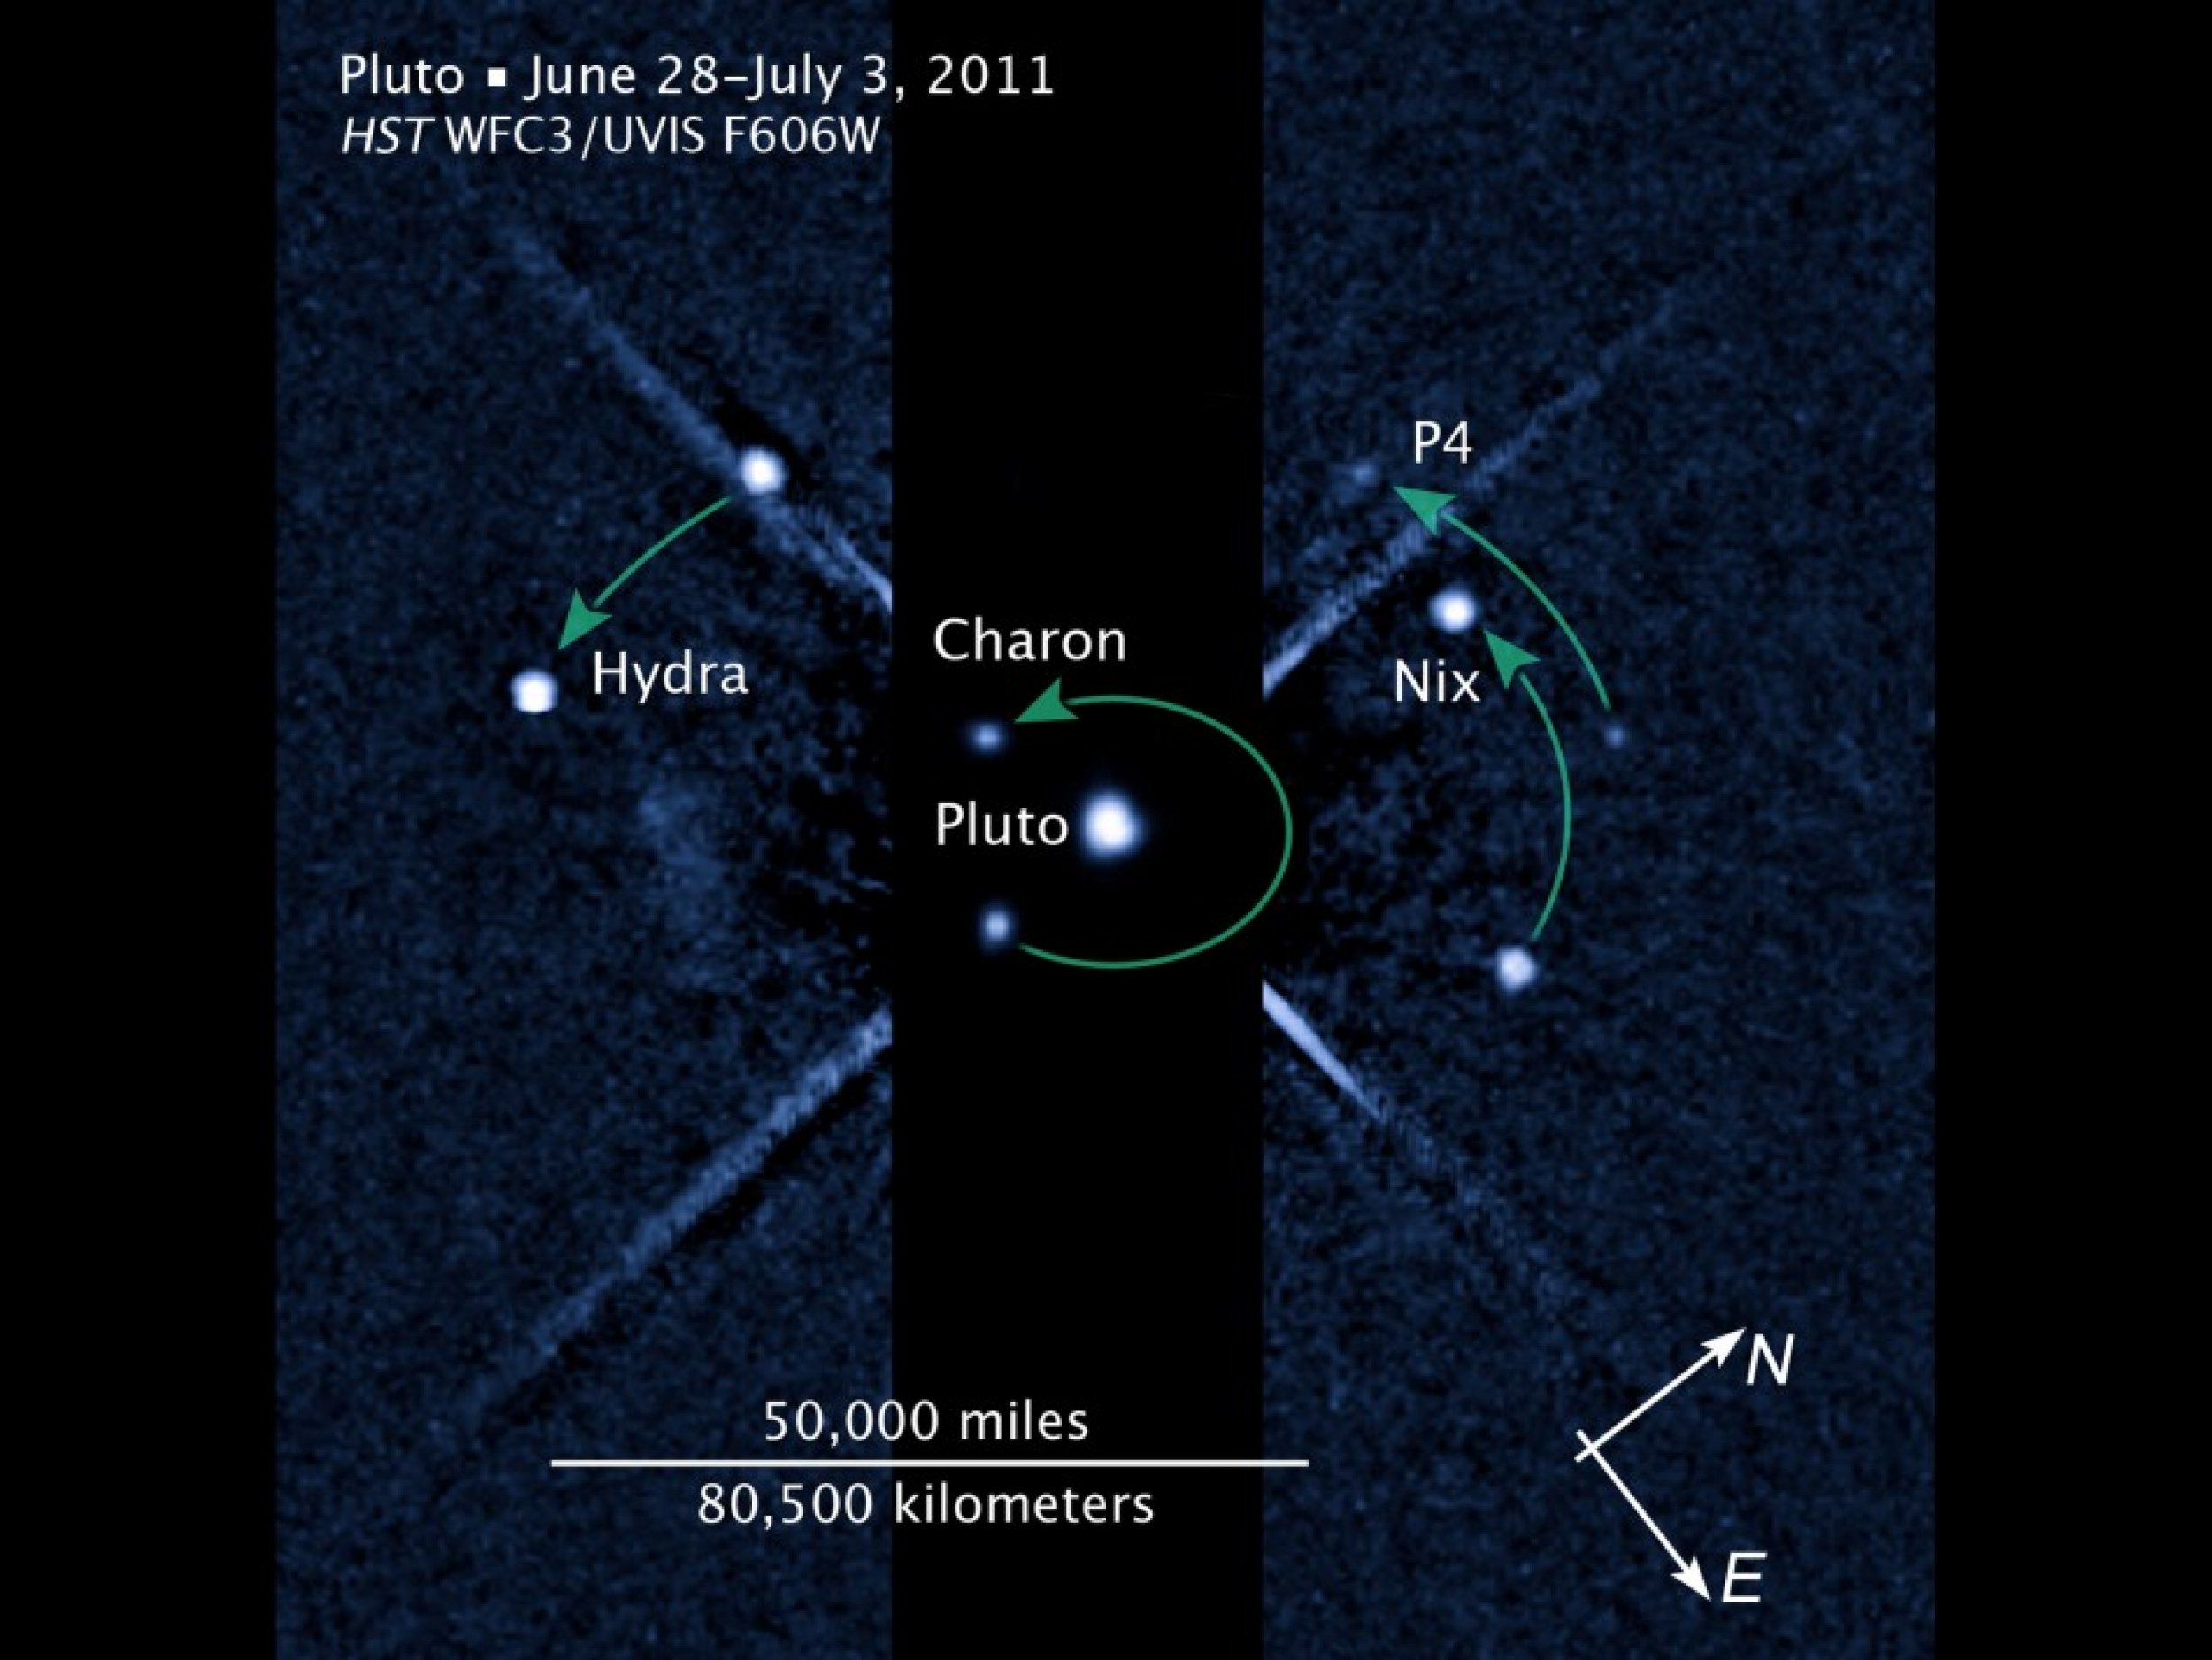 four moons of icy dwarf planet Pluto